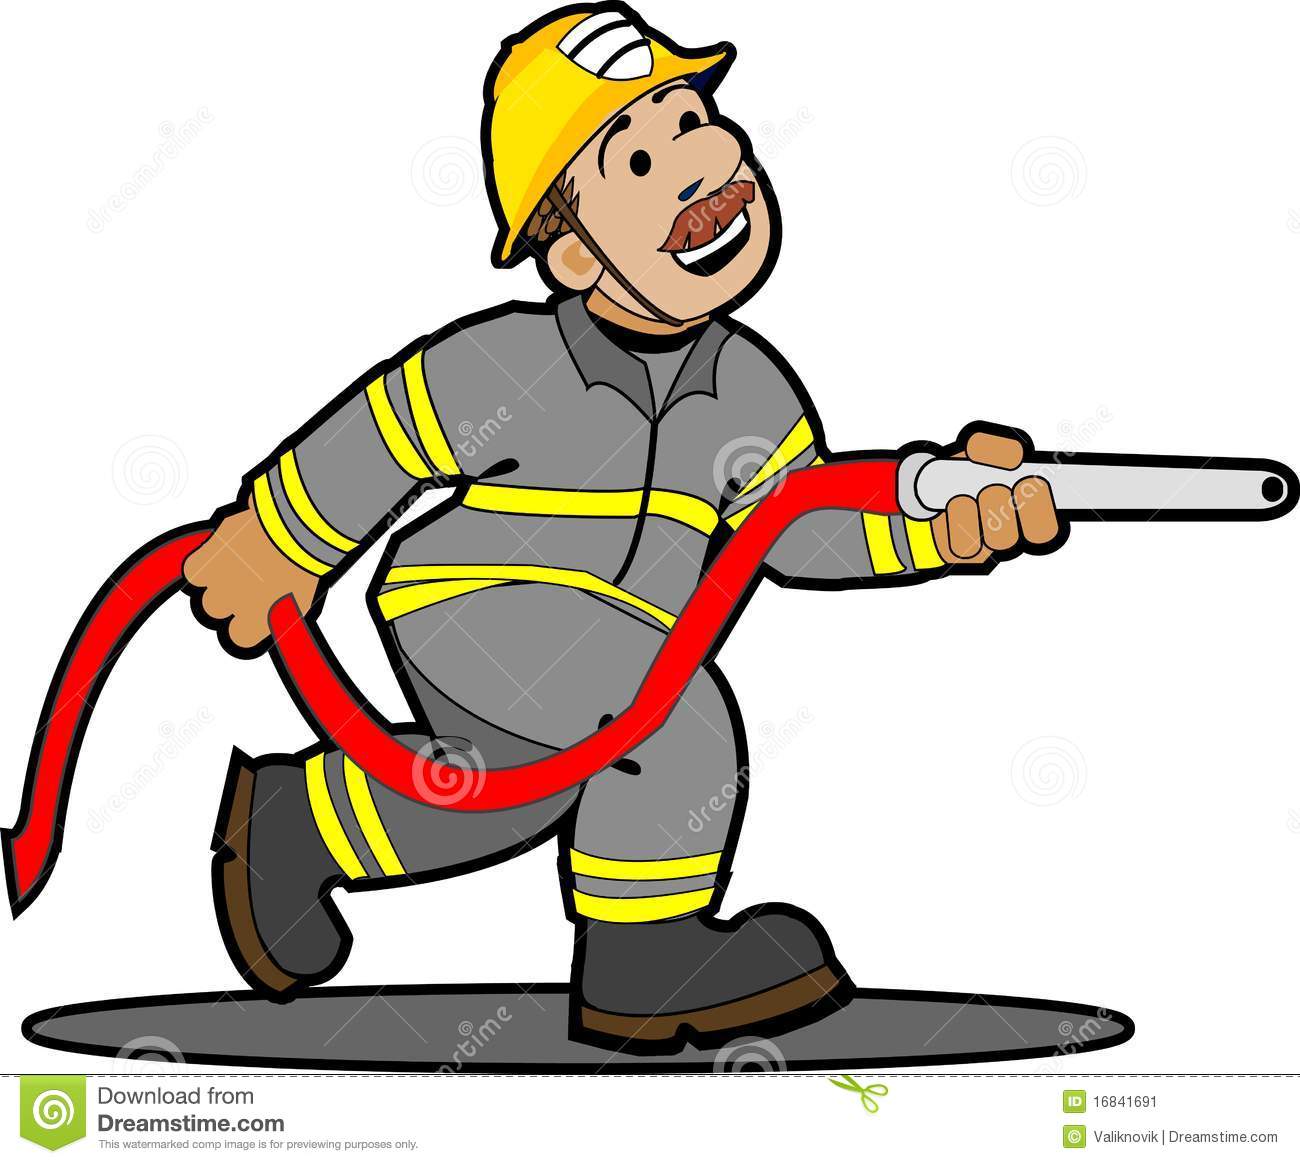 Fireman clipart attached. Cartoon stock image library